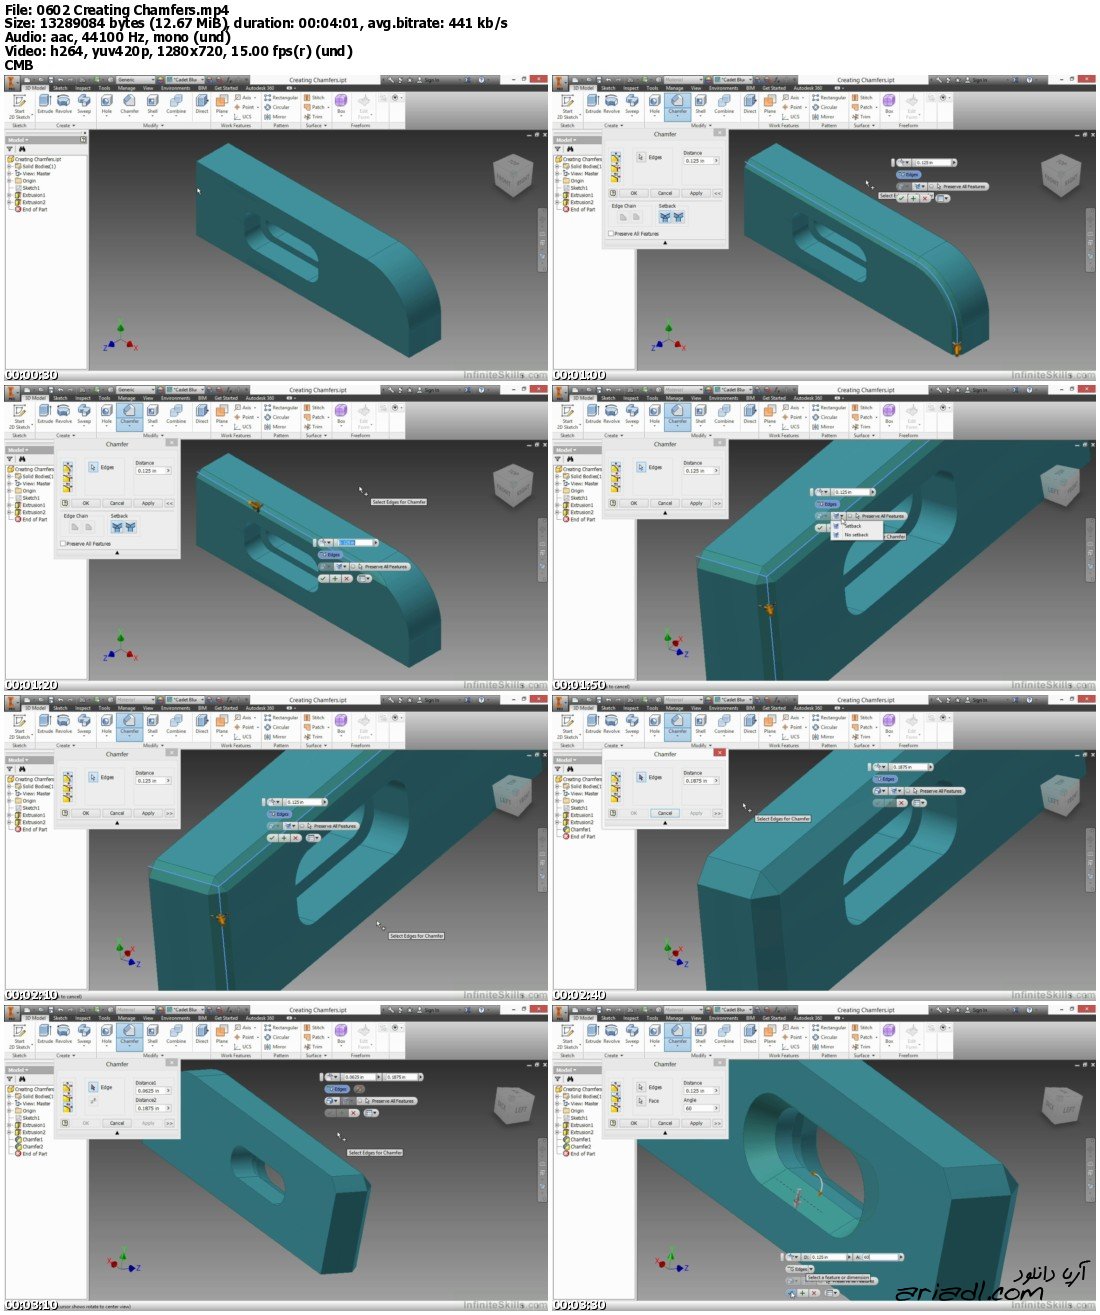 learning autodesk inventor 2015